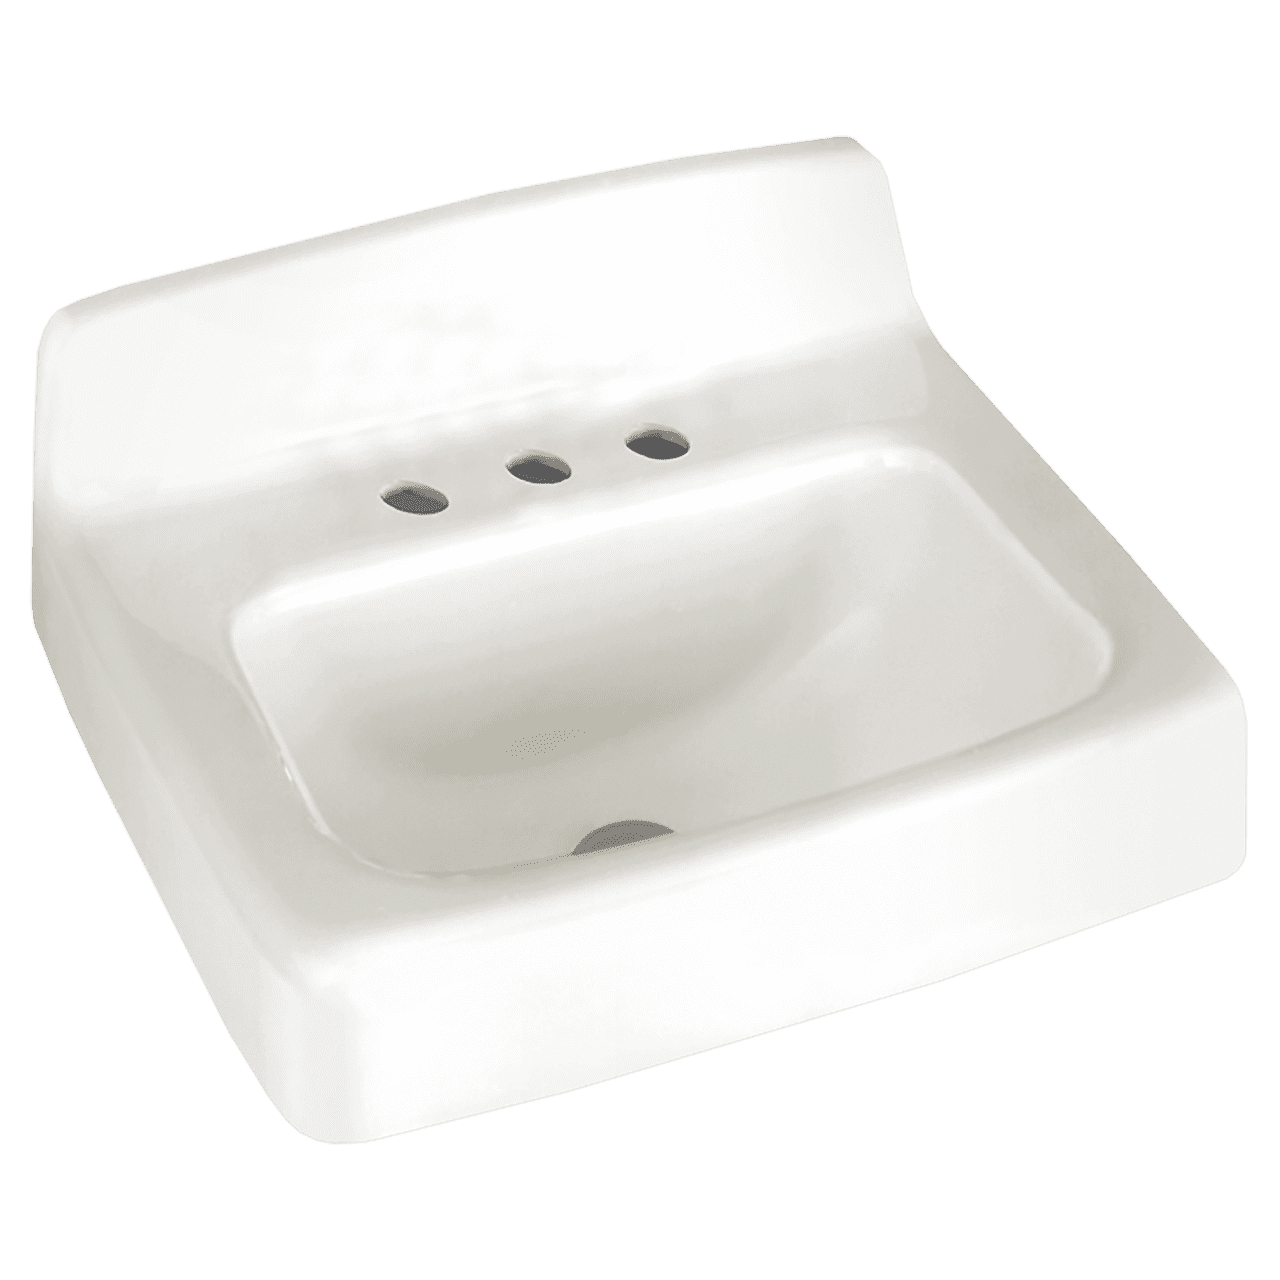 American Standard 4869.008.020 Regalyn Enameled Cast Iron Wall Hung Sink with 8-Inch Faucet Spacing White 4869008.020